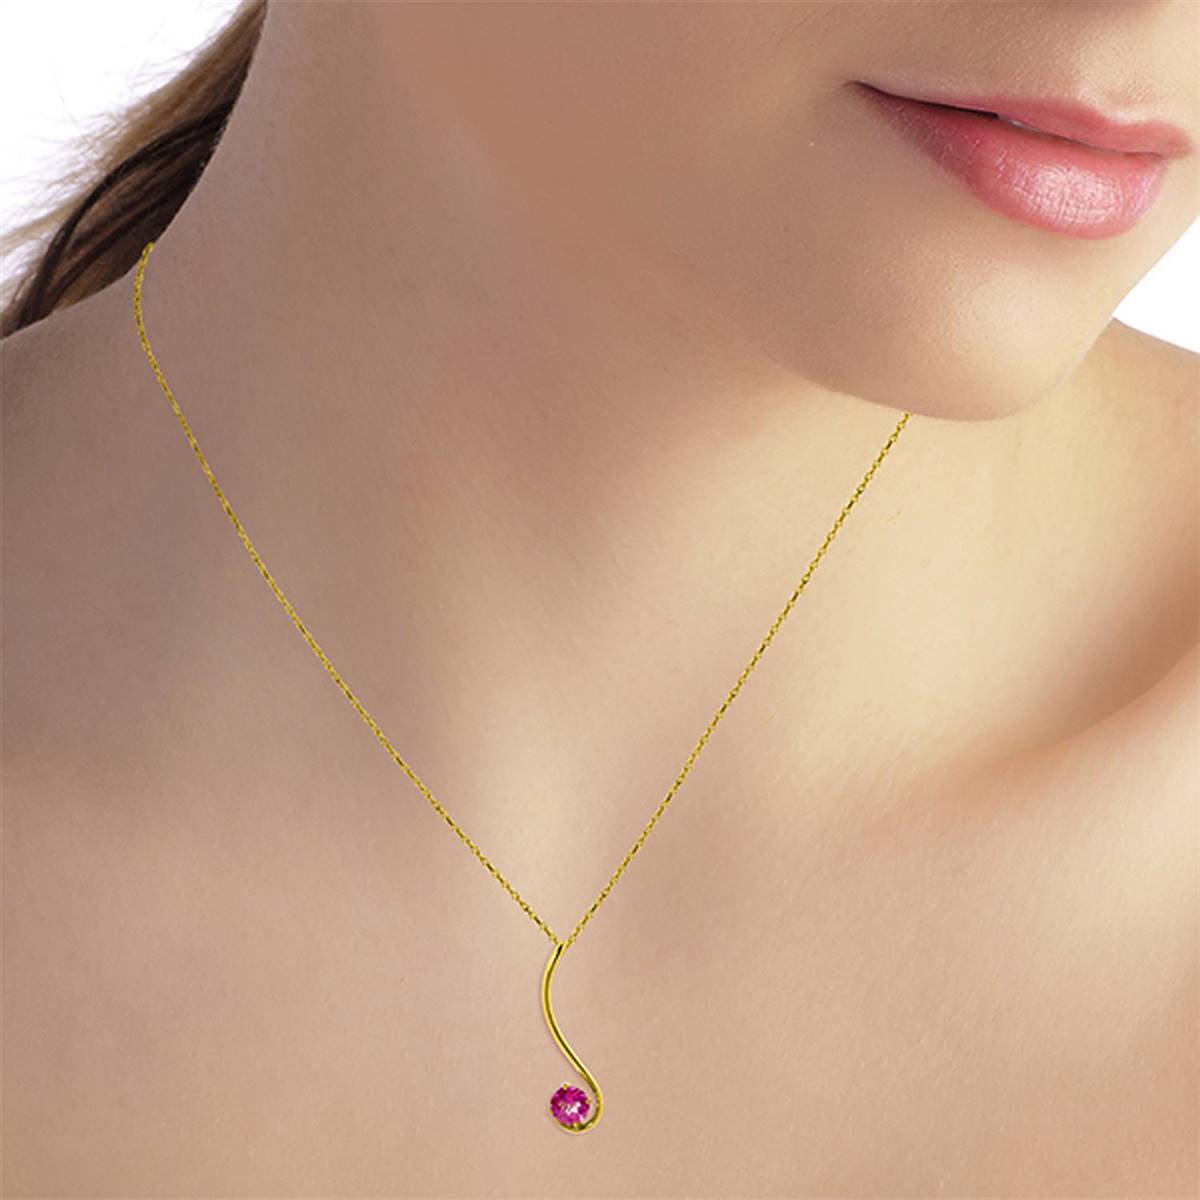 0.55 Carat 14K Solid Yellow Gold Pink Anemones Pink Topaz Necklace